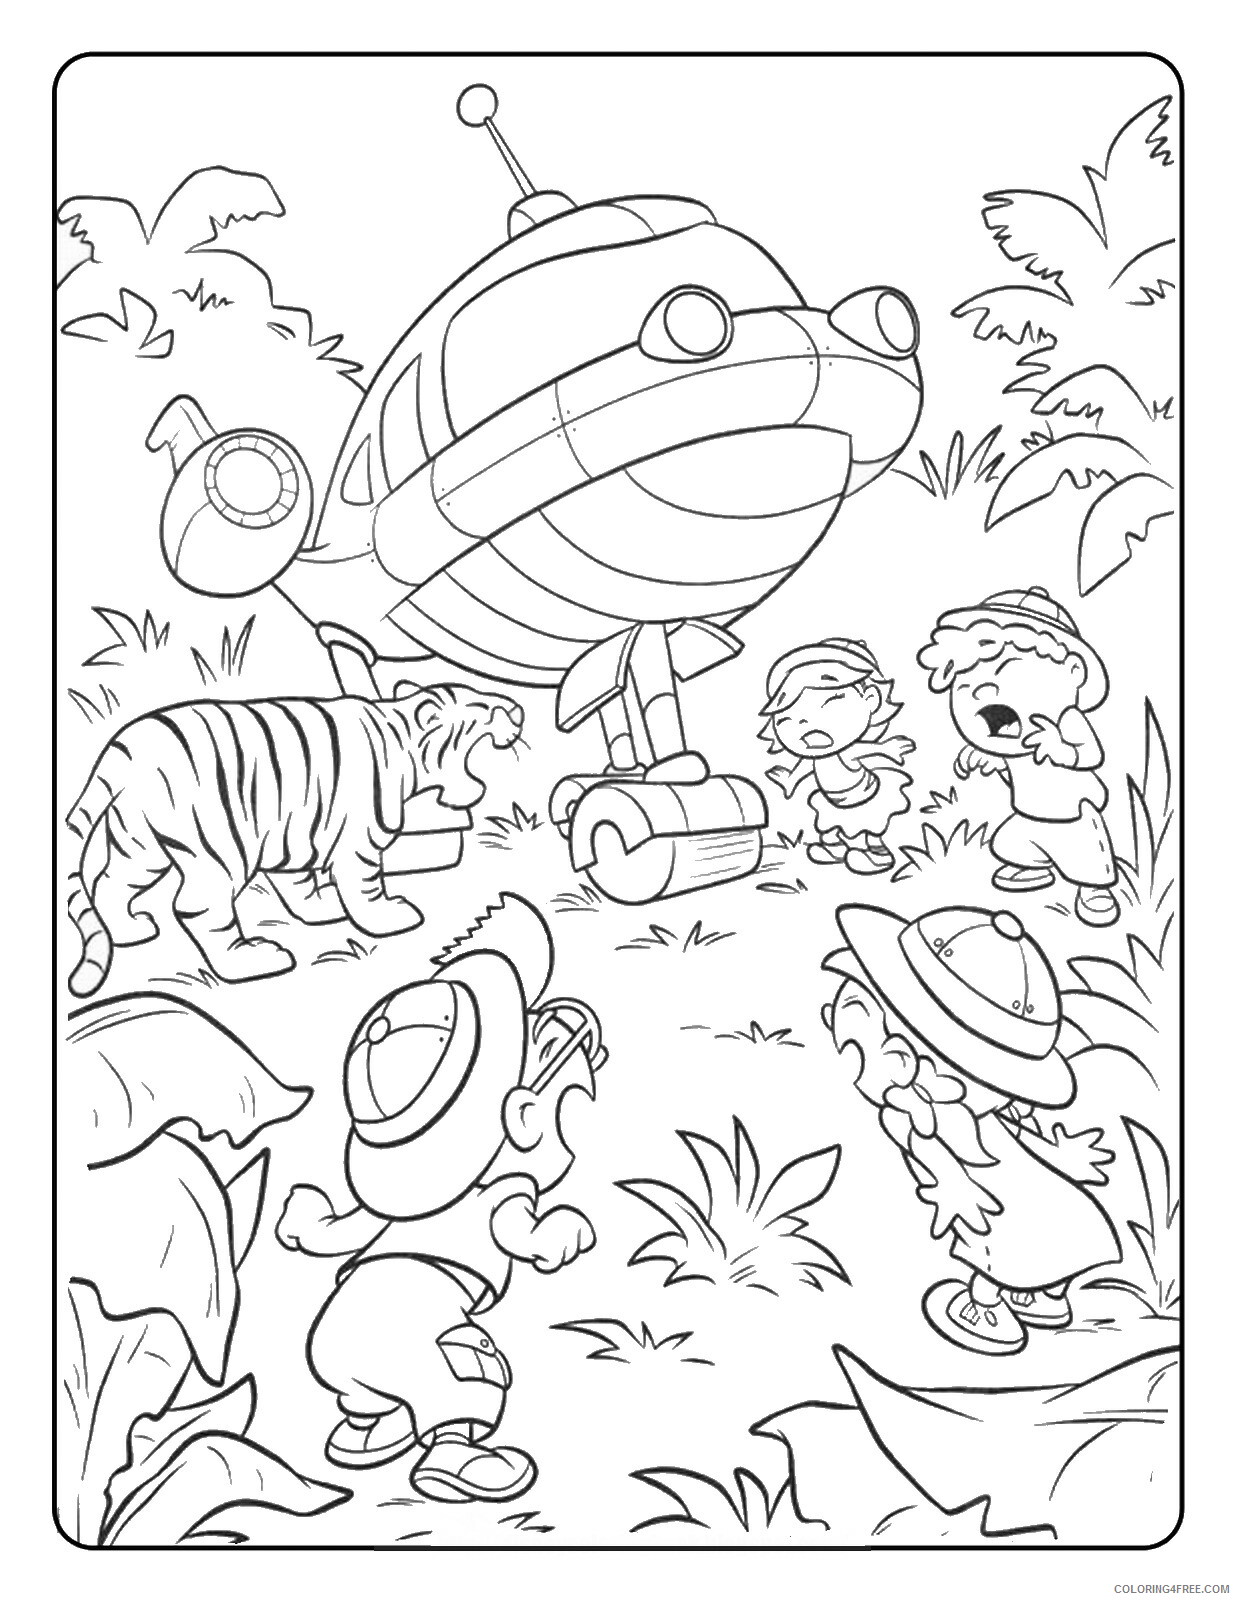 Little Einsteins Coloring Pages TV Film little_einsteins_11 Printable 2020 04475 Coloring4free